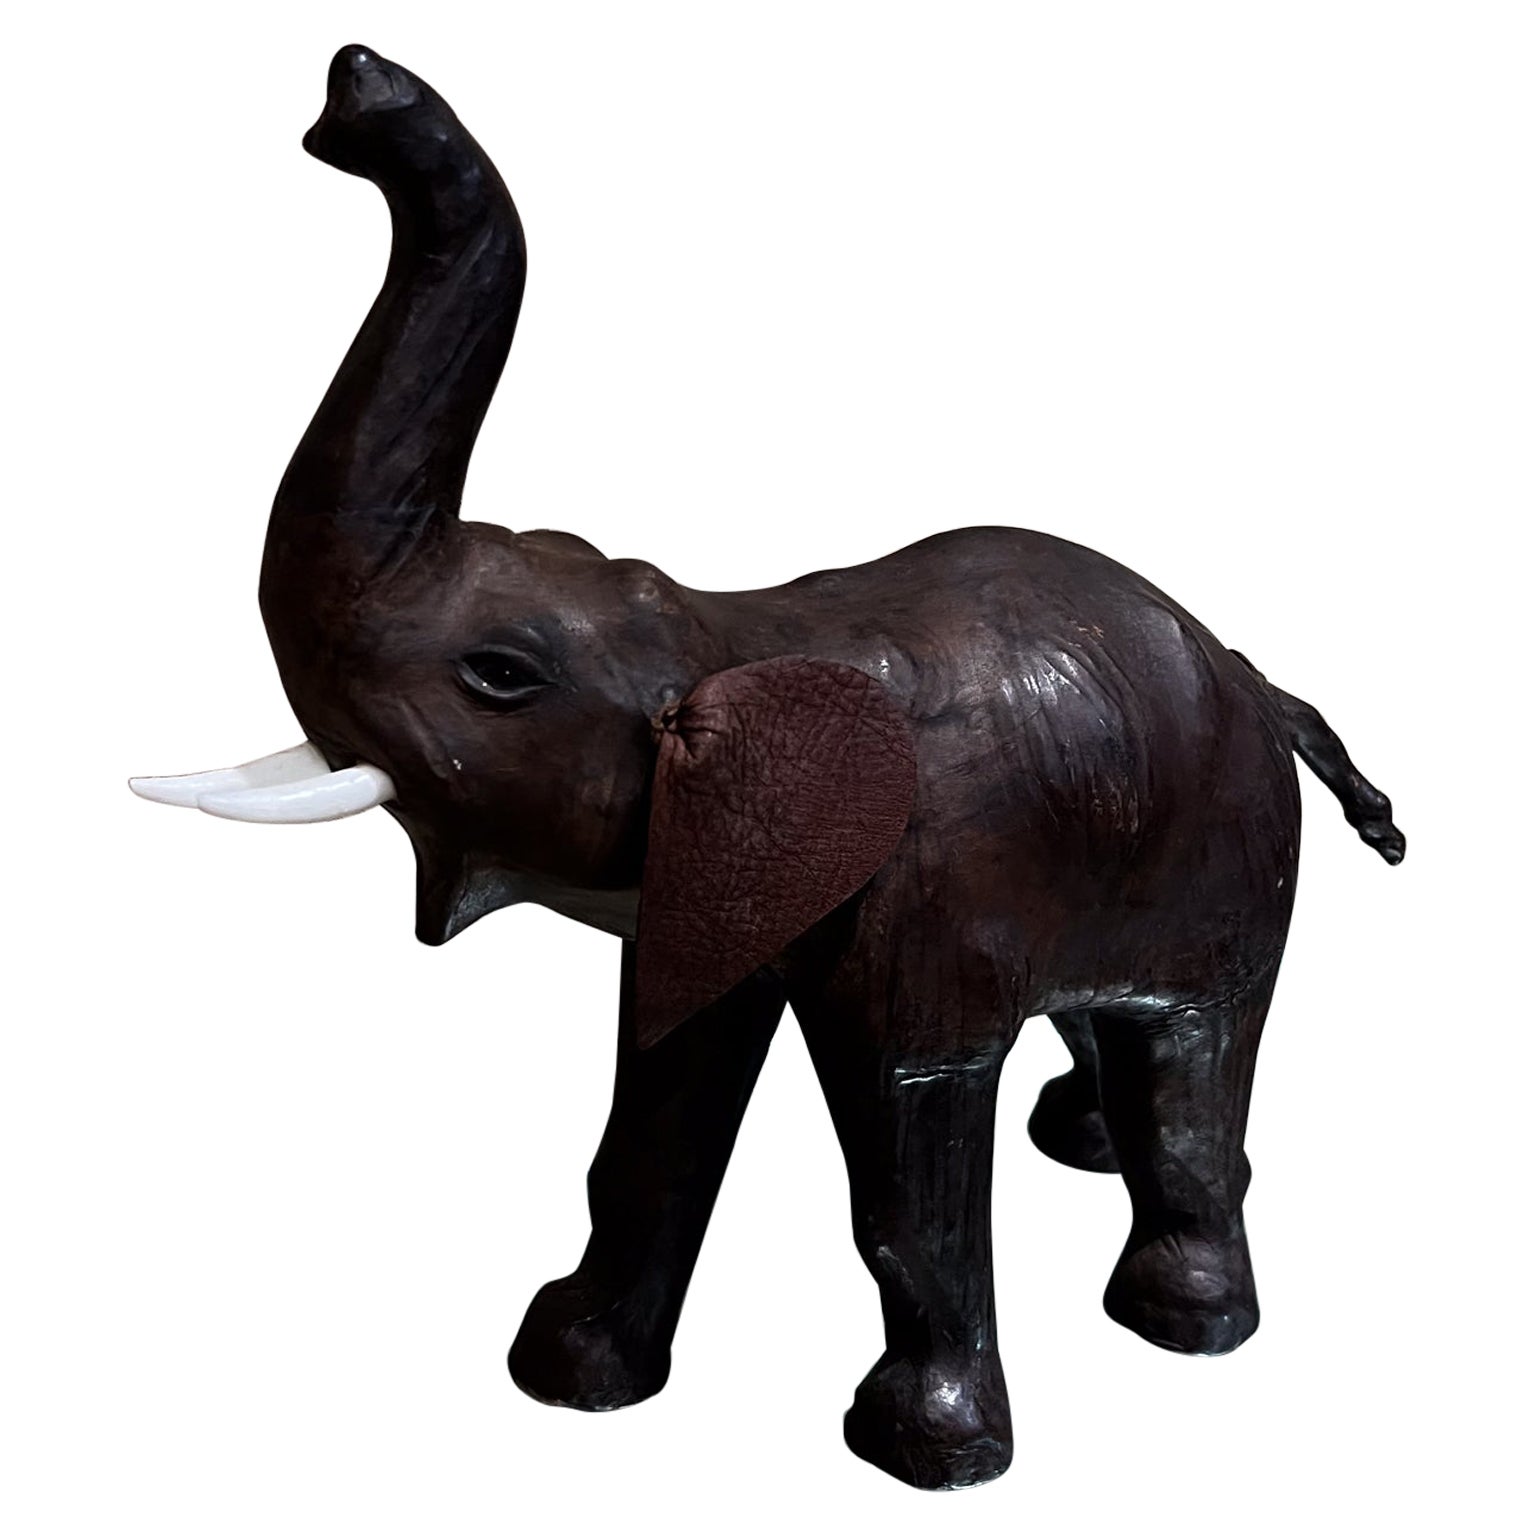 1960s Modern Leather Elephant Table Sculpture For Sale